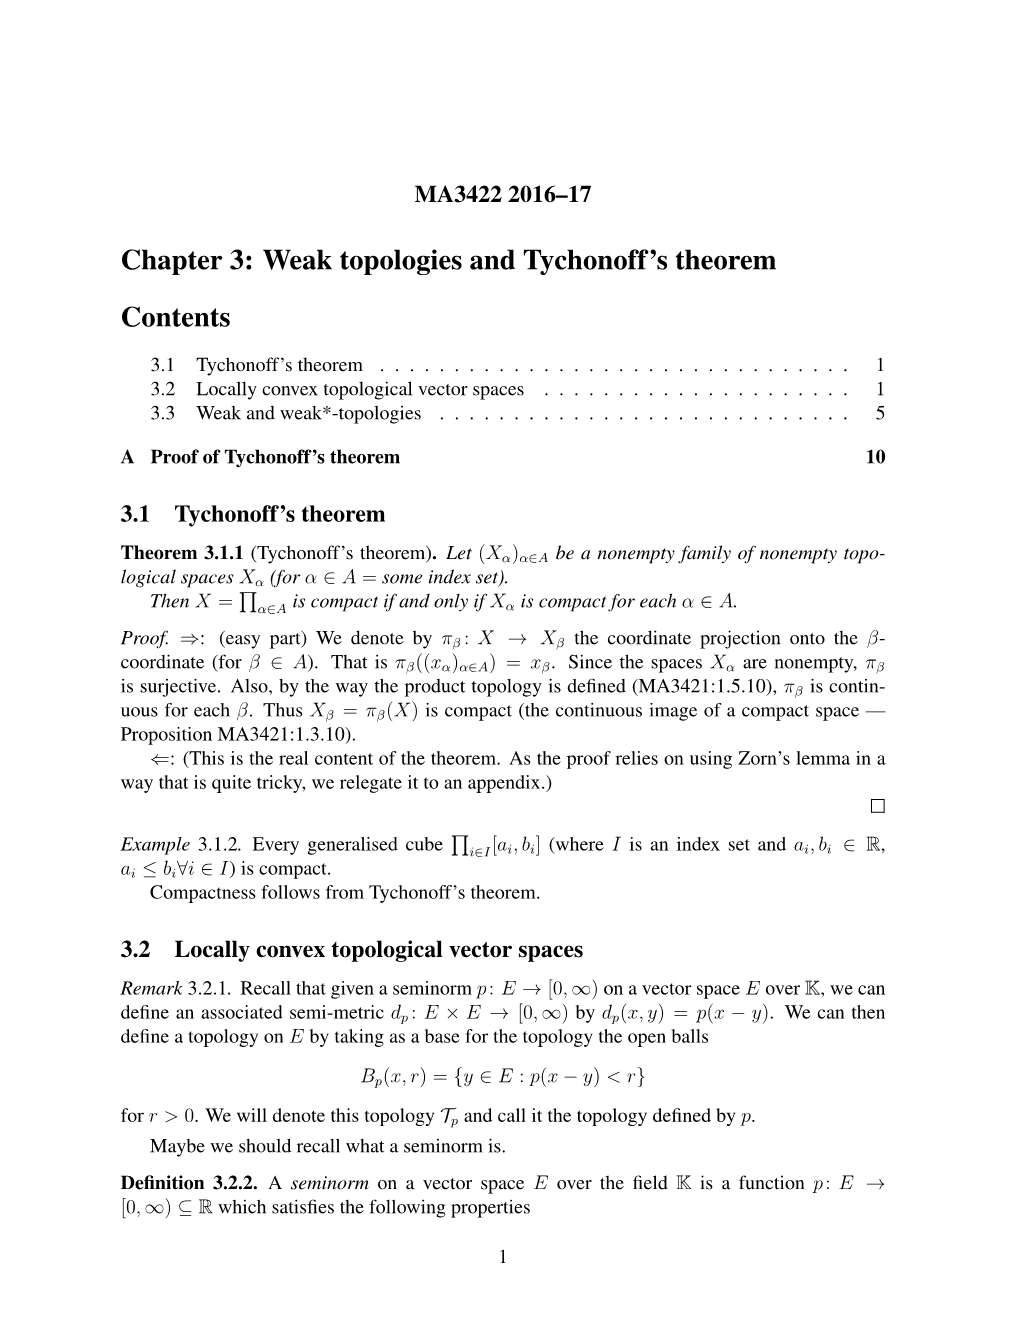 Weak Topologies and Tychonoff's Theorem Contents